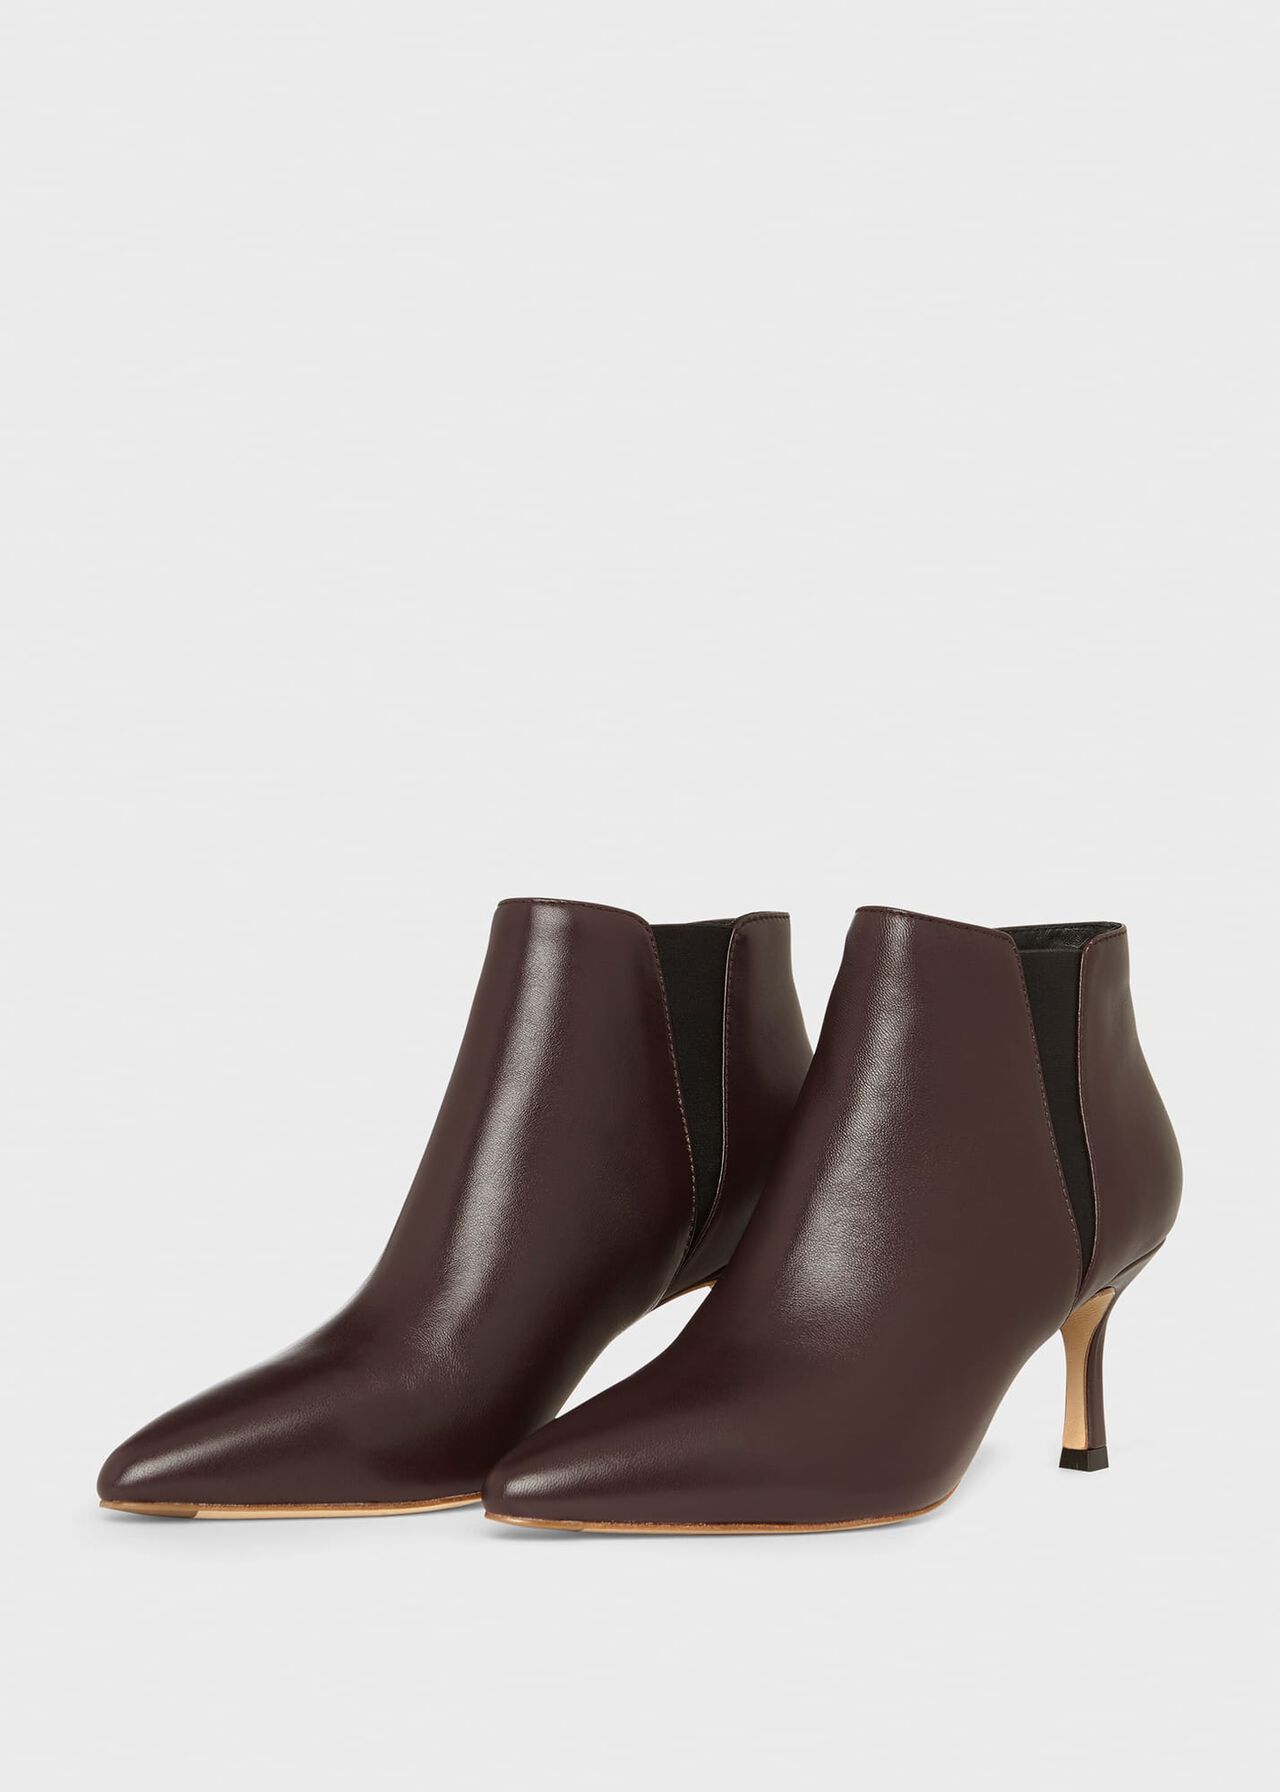 Vita Leather Ankle Boots, Burgundy, hi-res